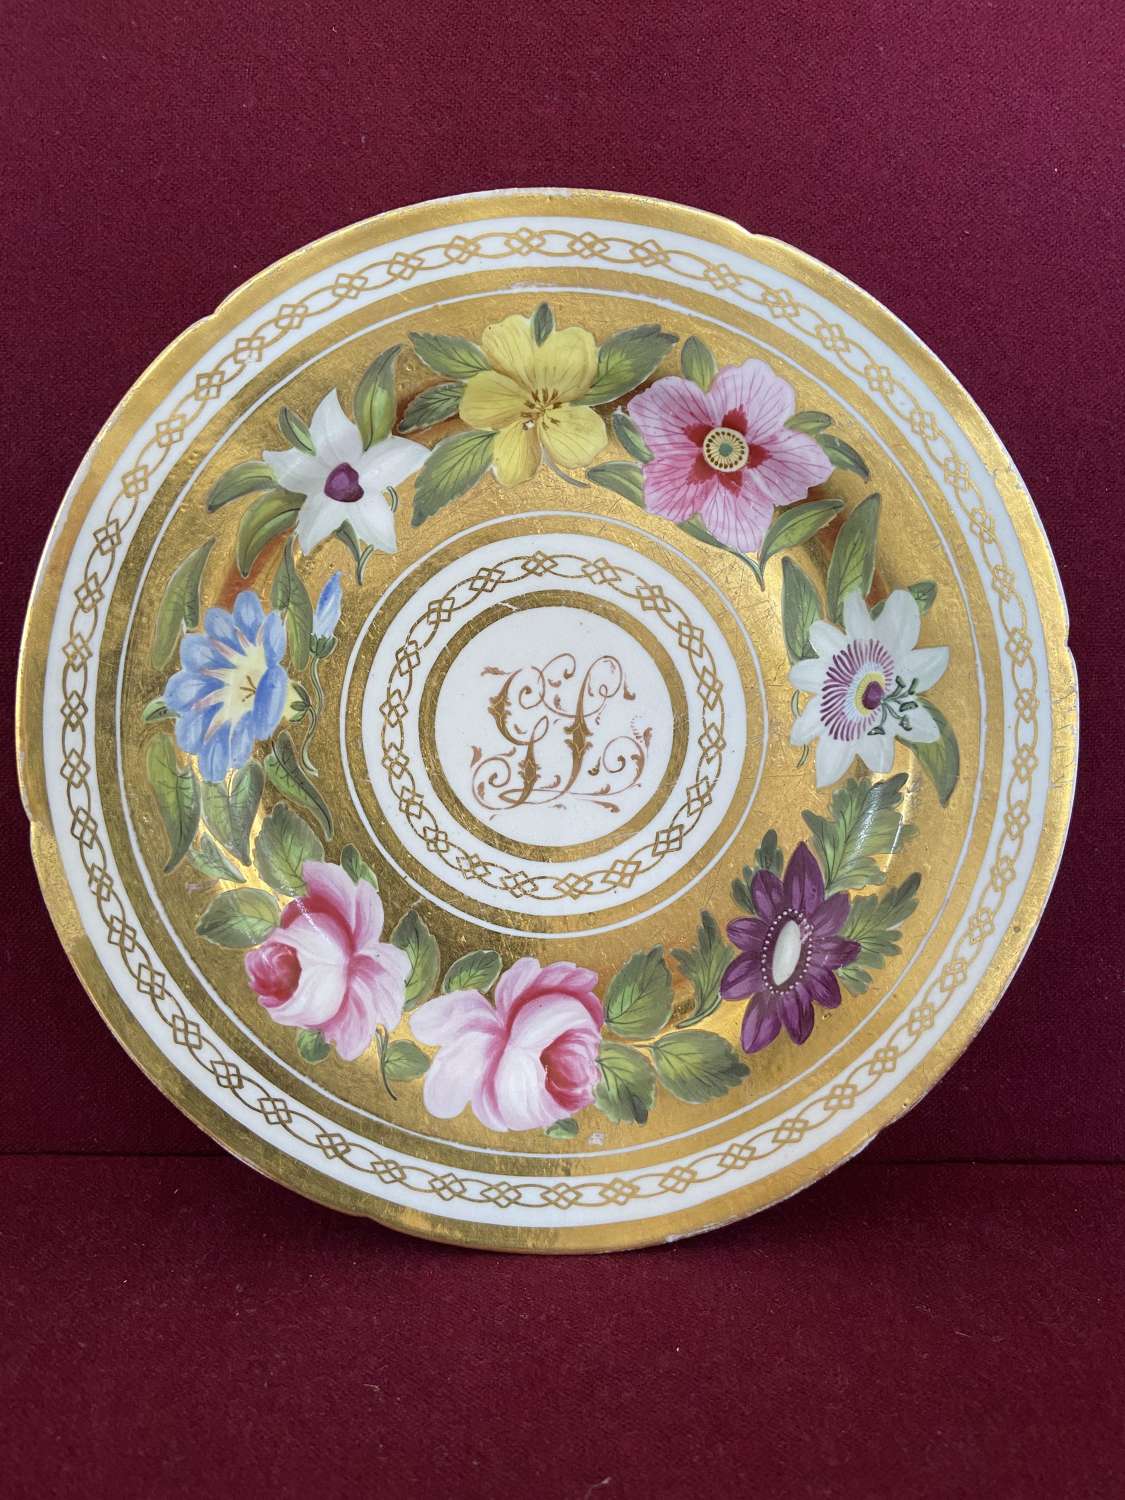 A Coalport porcelain 'Marquis of Anglesey' pattern plate c.1805